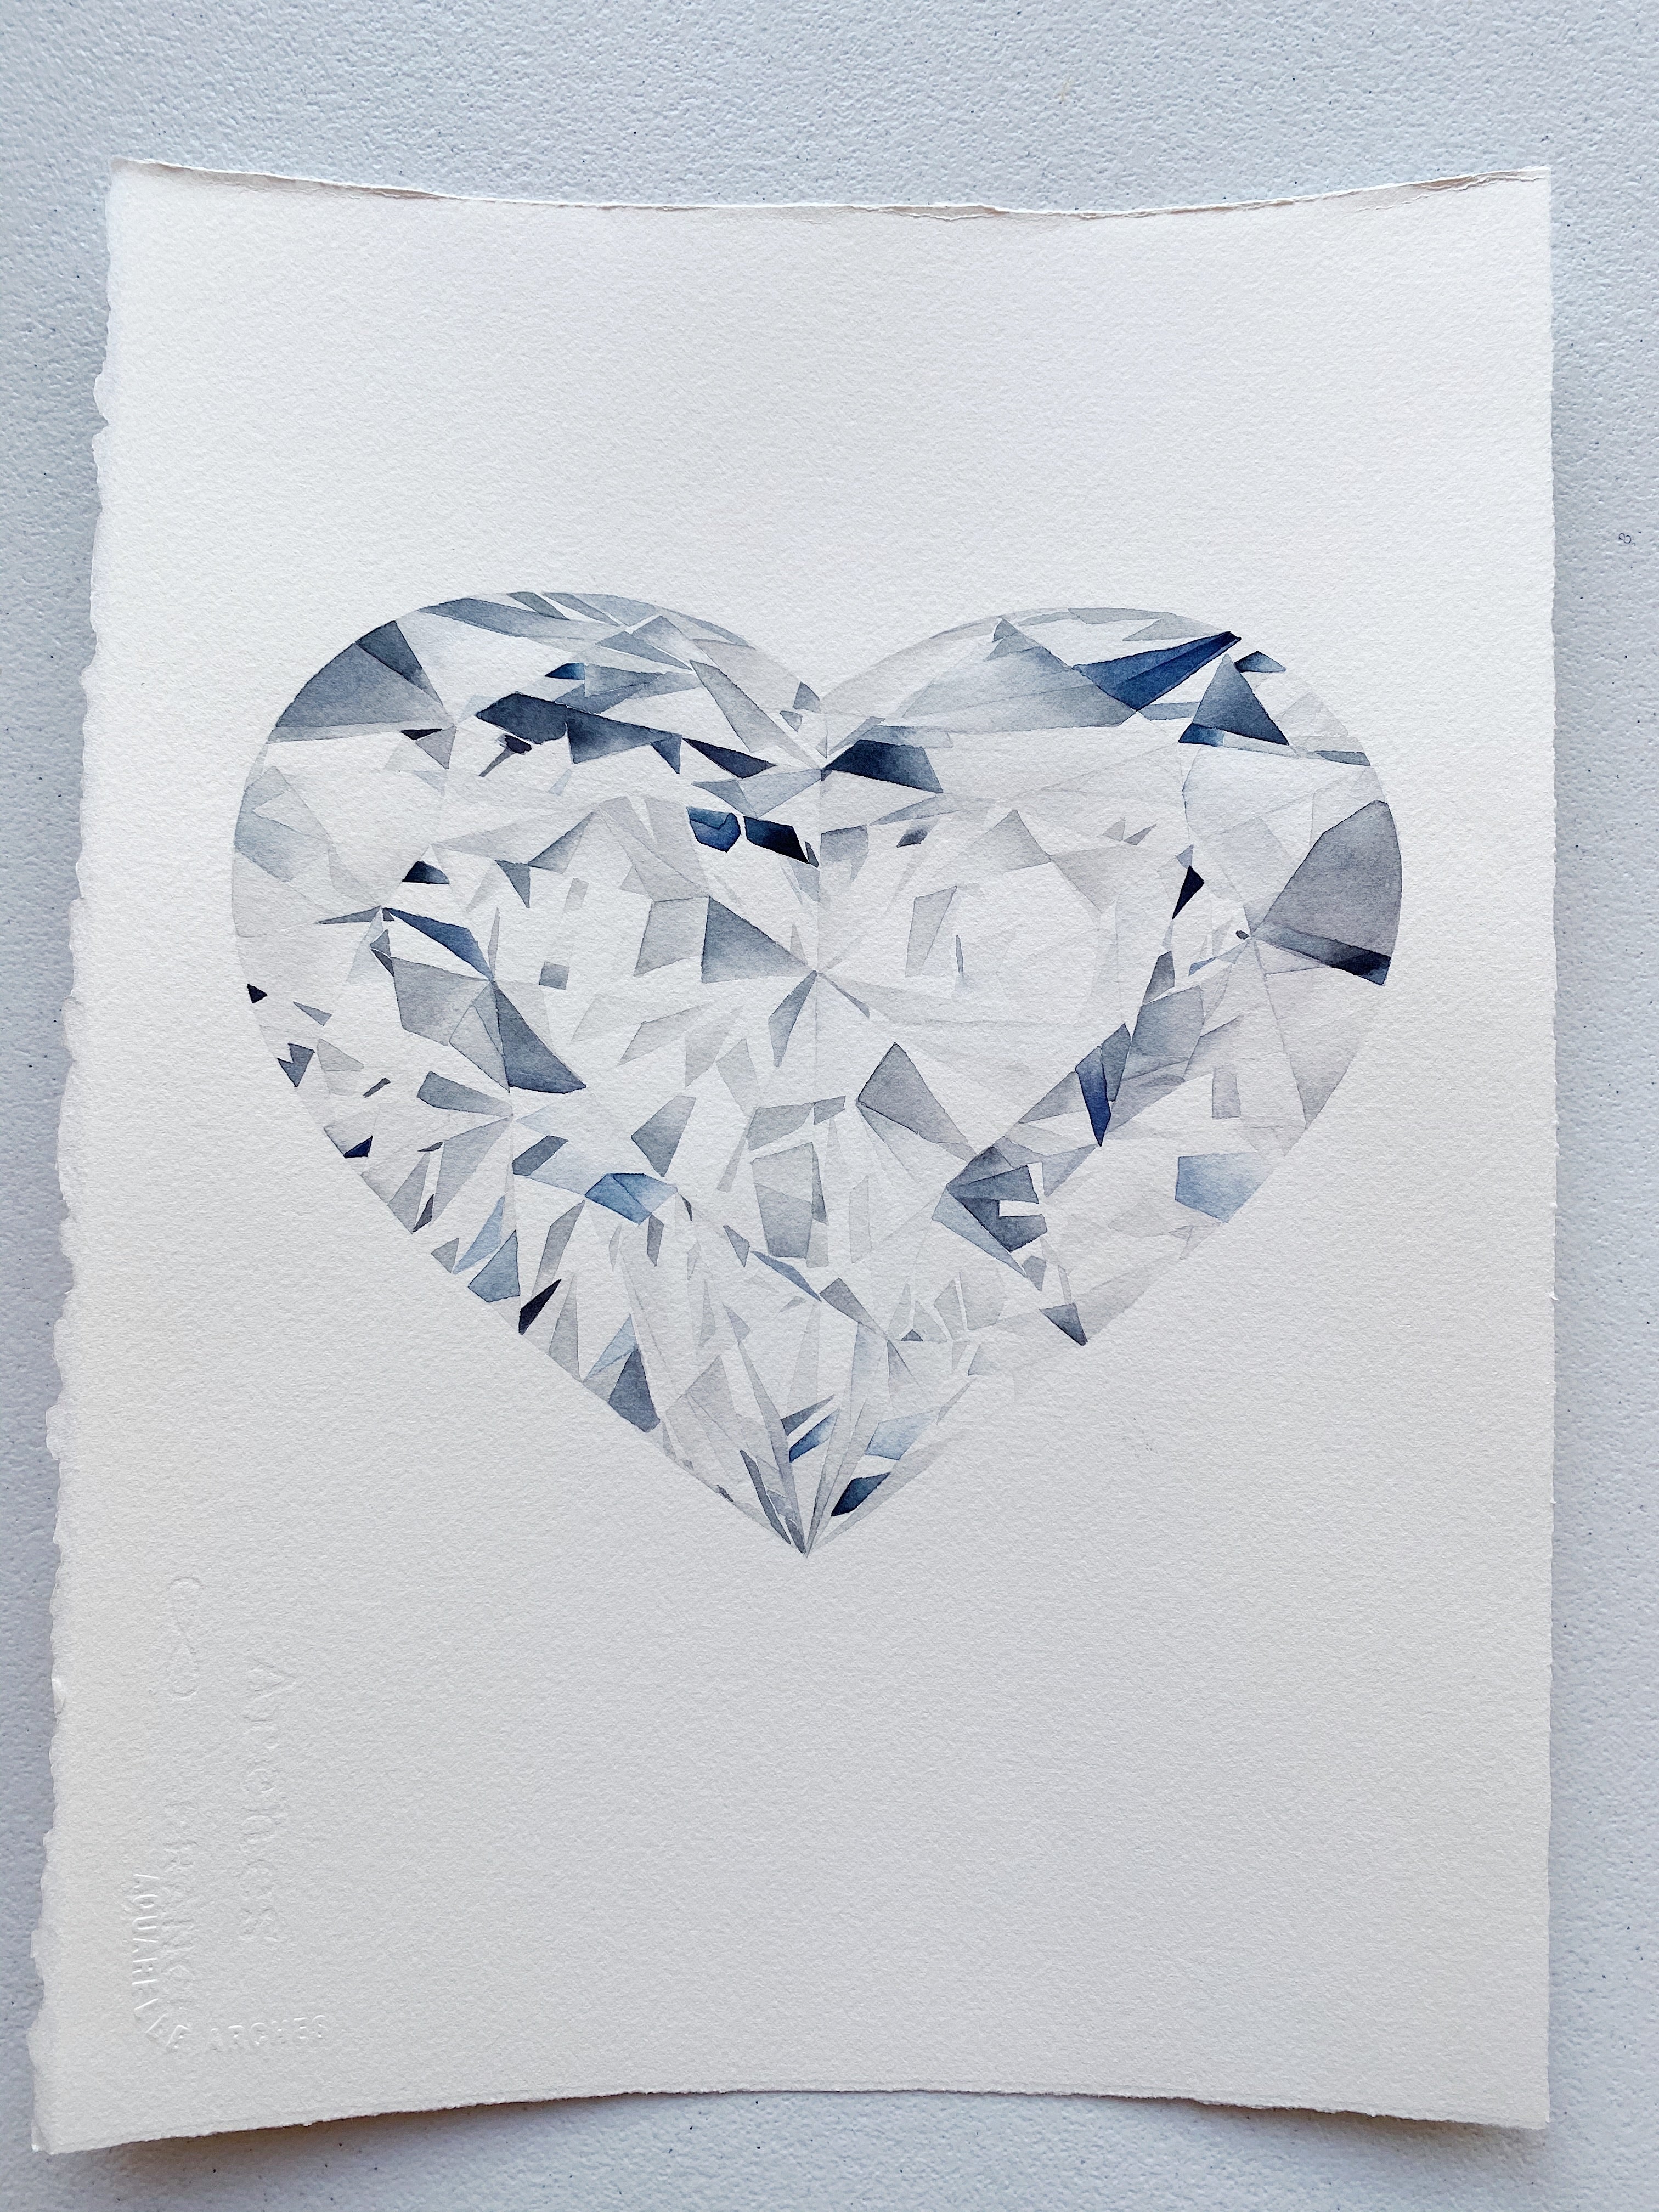 Original Painting - Watercolor Heart Shaped Diamond Painting 11x15 inches